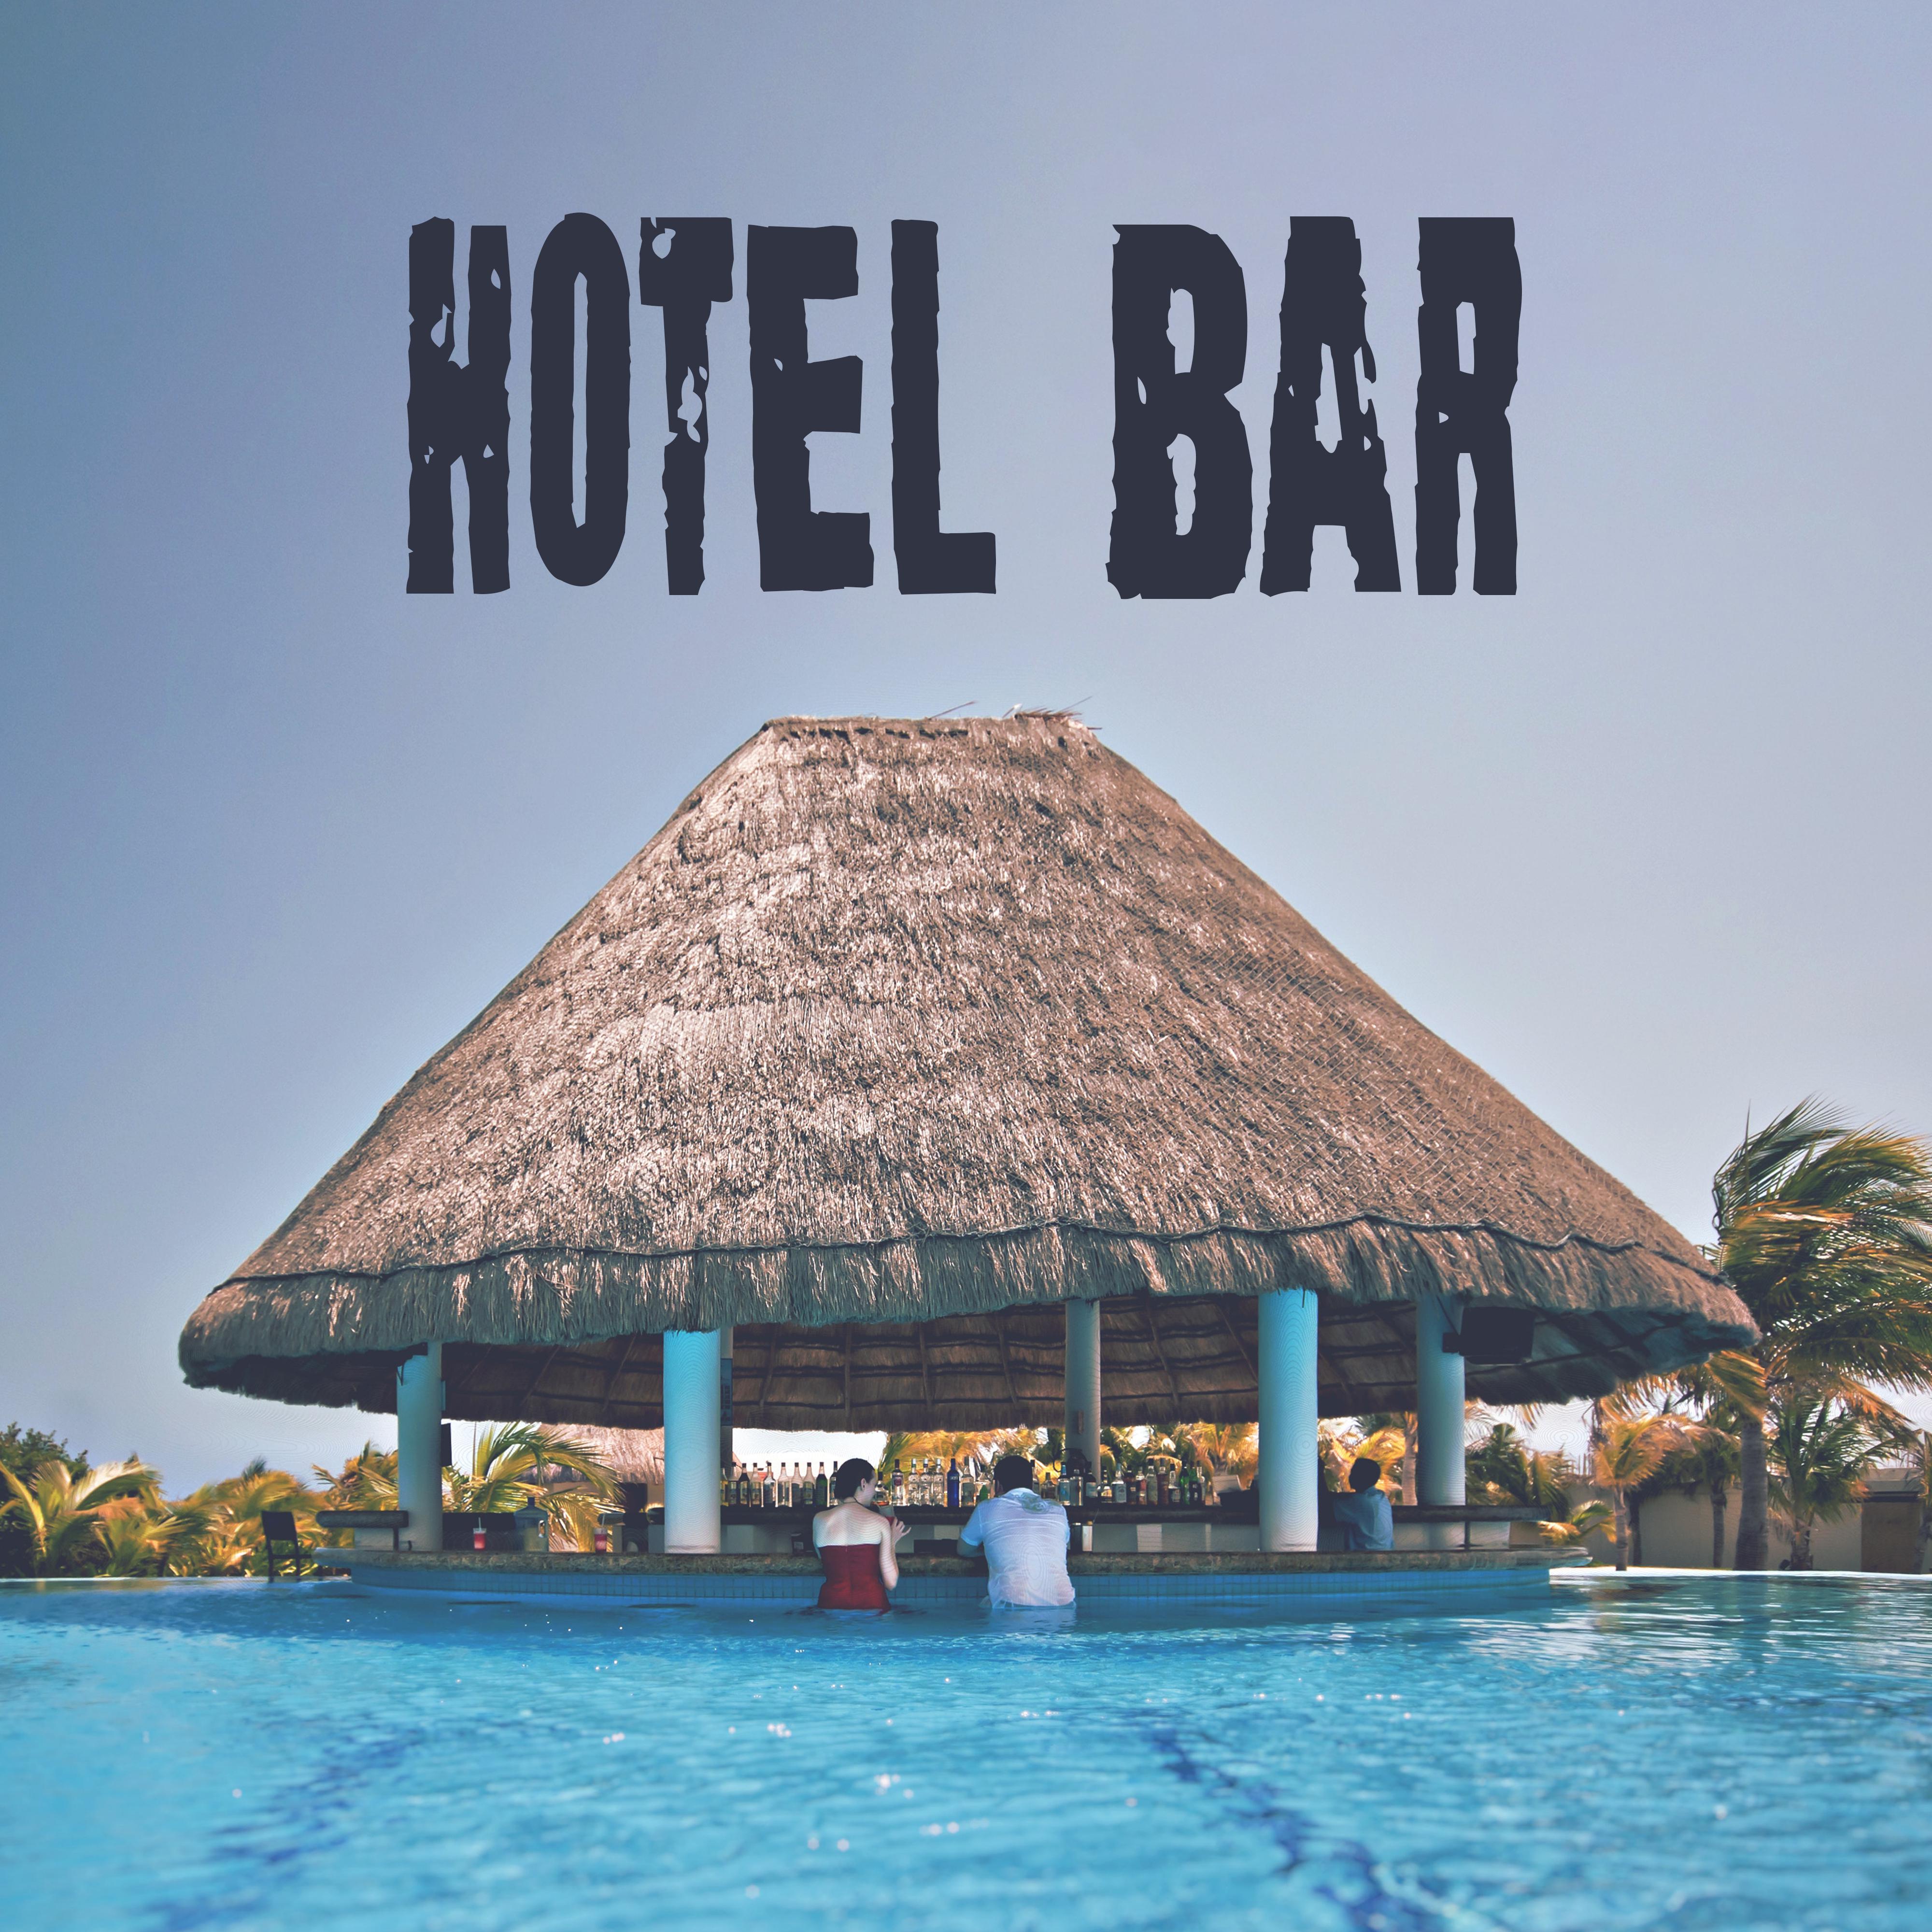 Hotel Bar: Ibiza Relaxation, Beach Bar Party, Relax Under Palms, Chill Out 2019, Ibiza Lounge